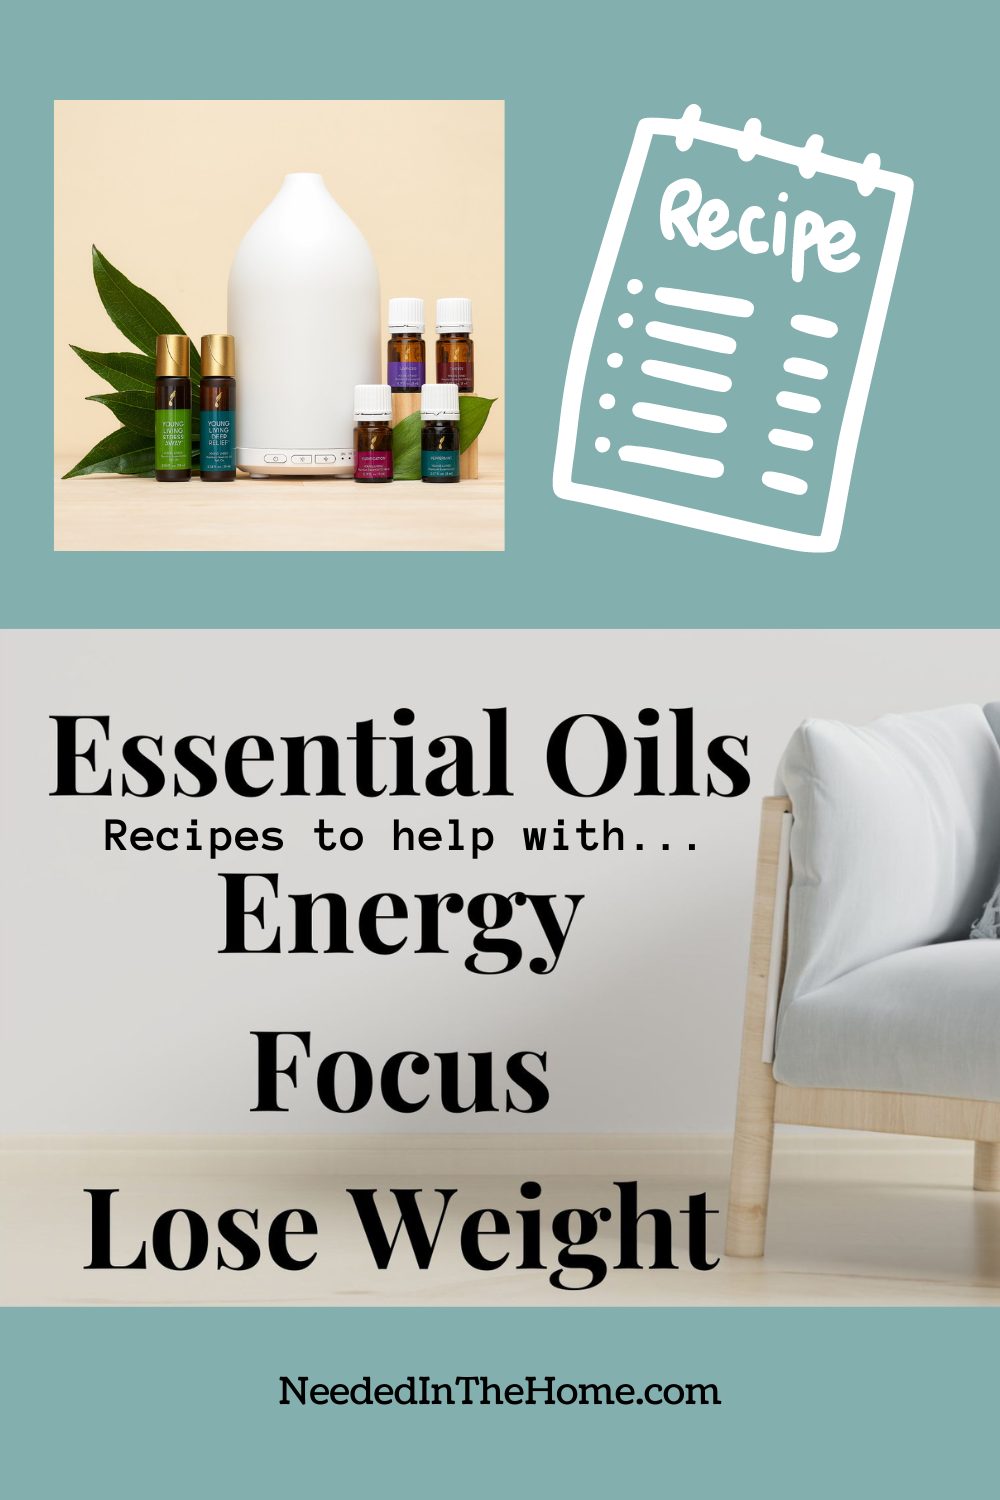 essential oils recipes to help with energy focus lose weight diffuser chair neededinthehome